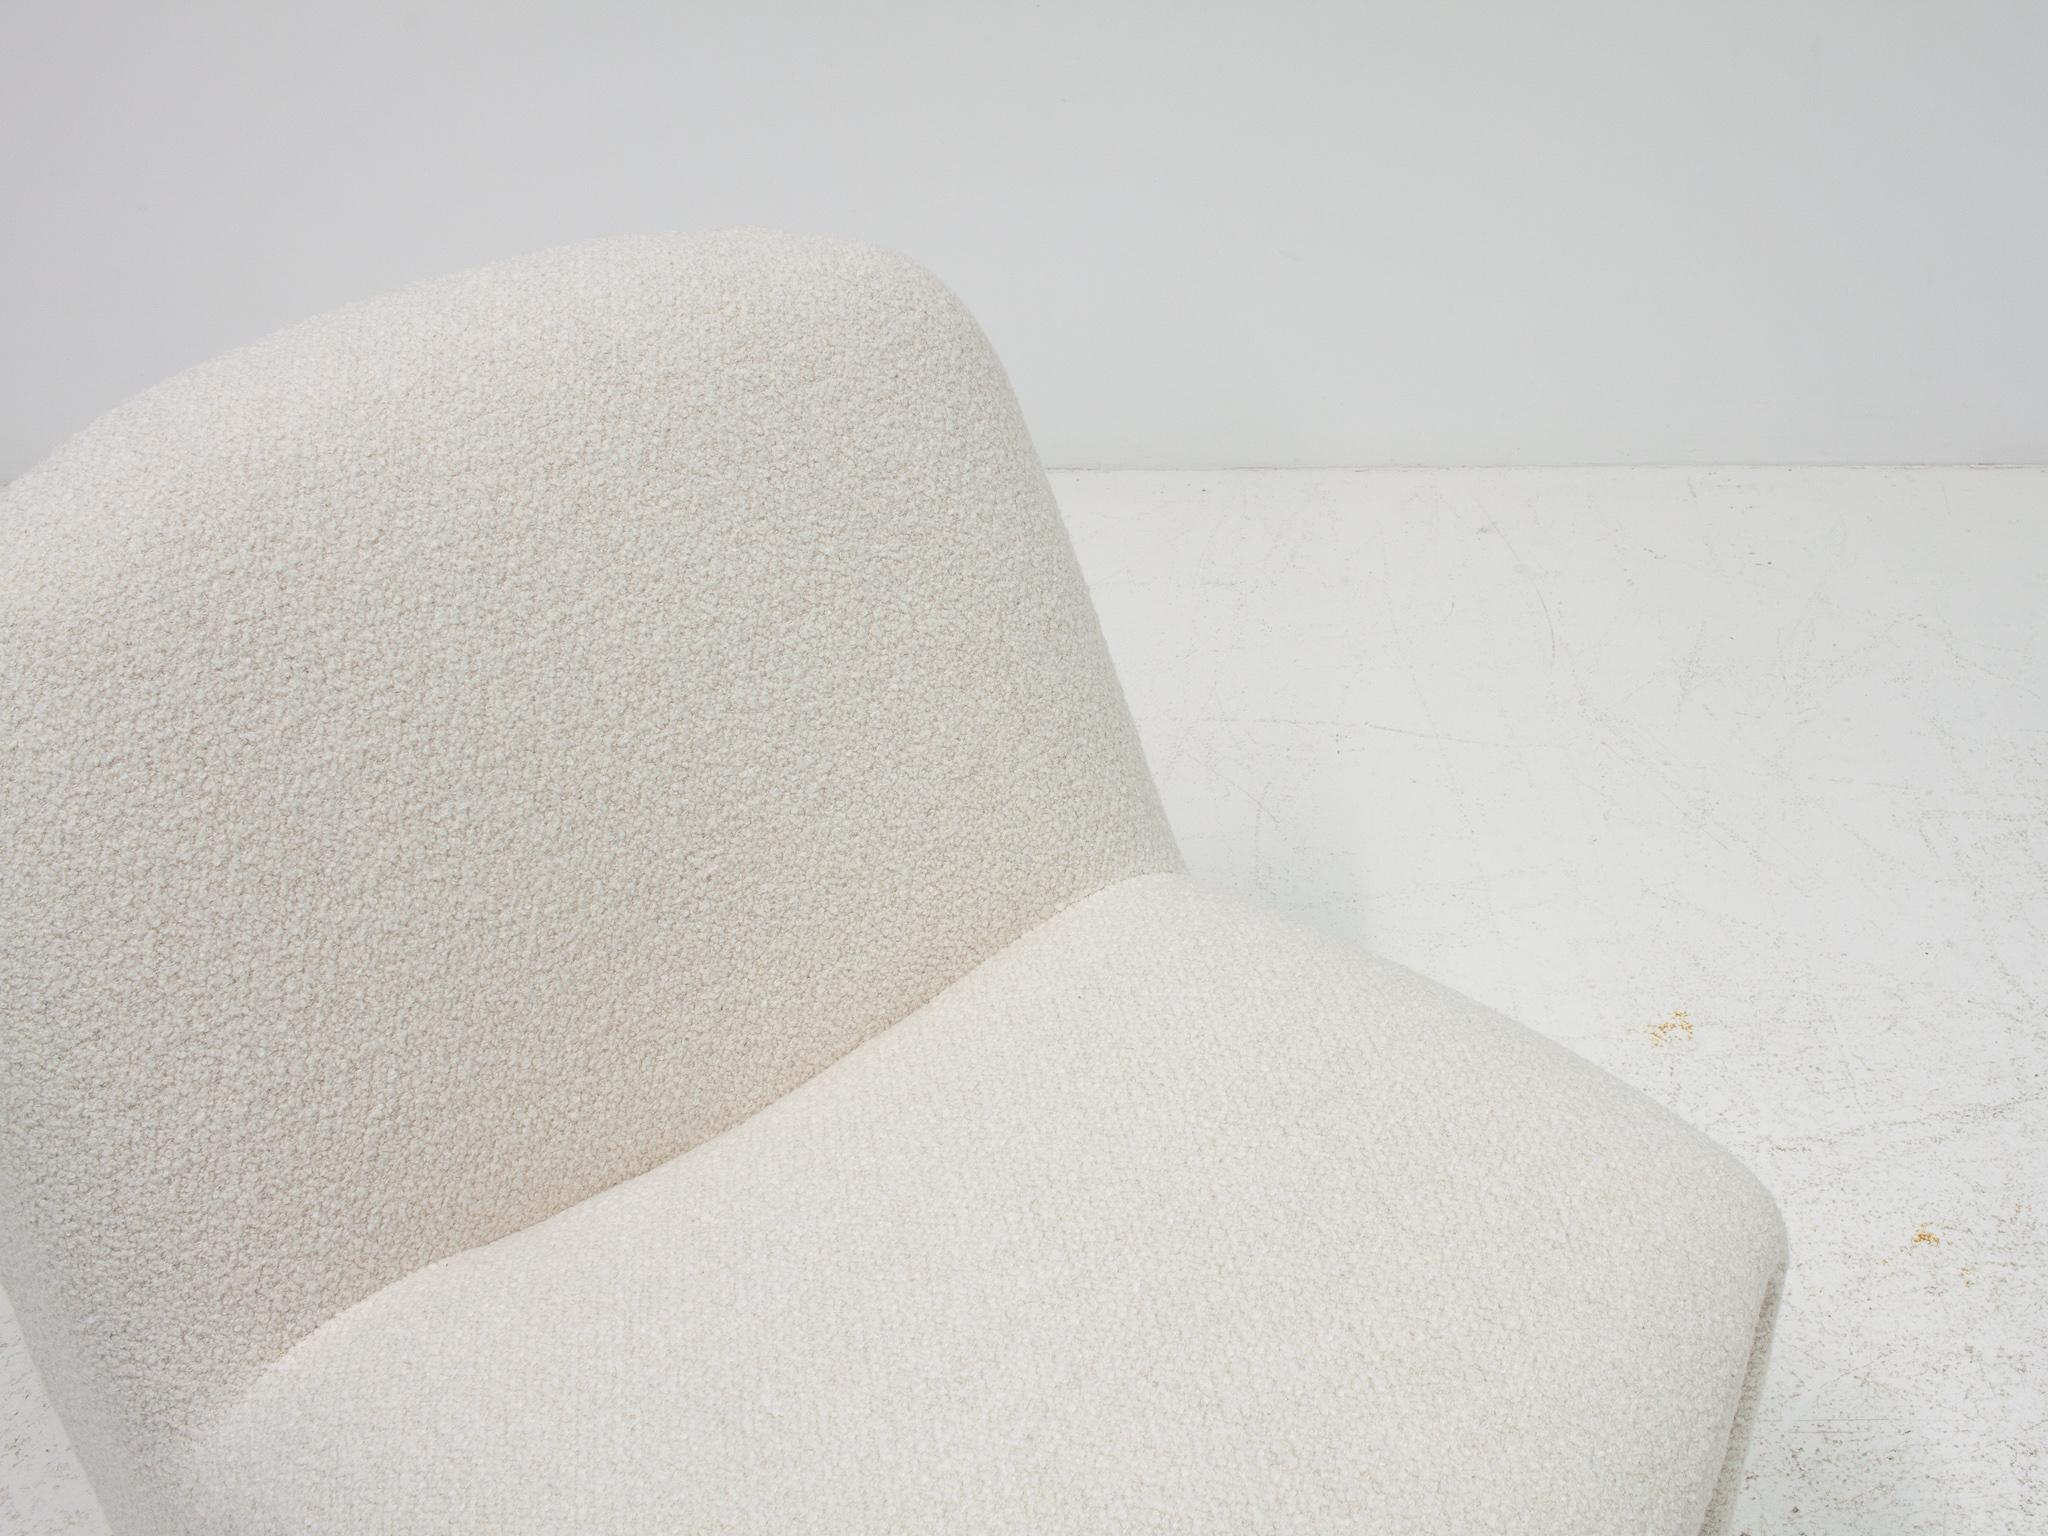 Giancarlo Piretti Alky Chairs In Yarn Collective bouclé *Personnalisable* en vente 3